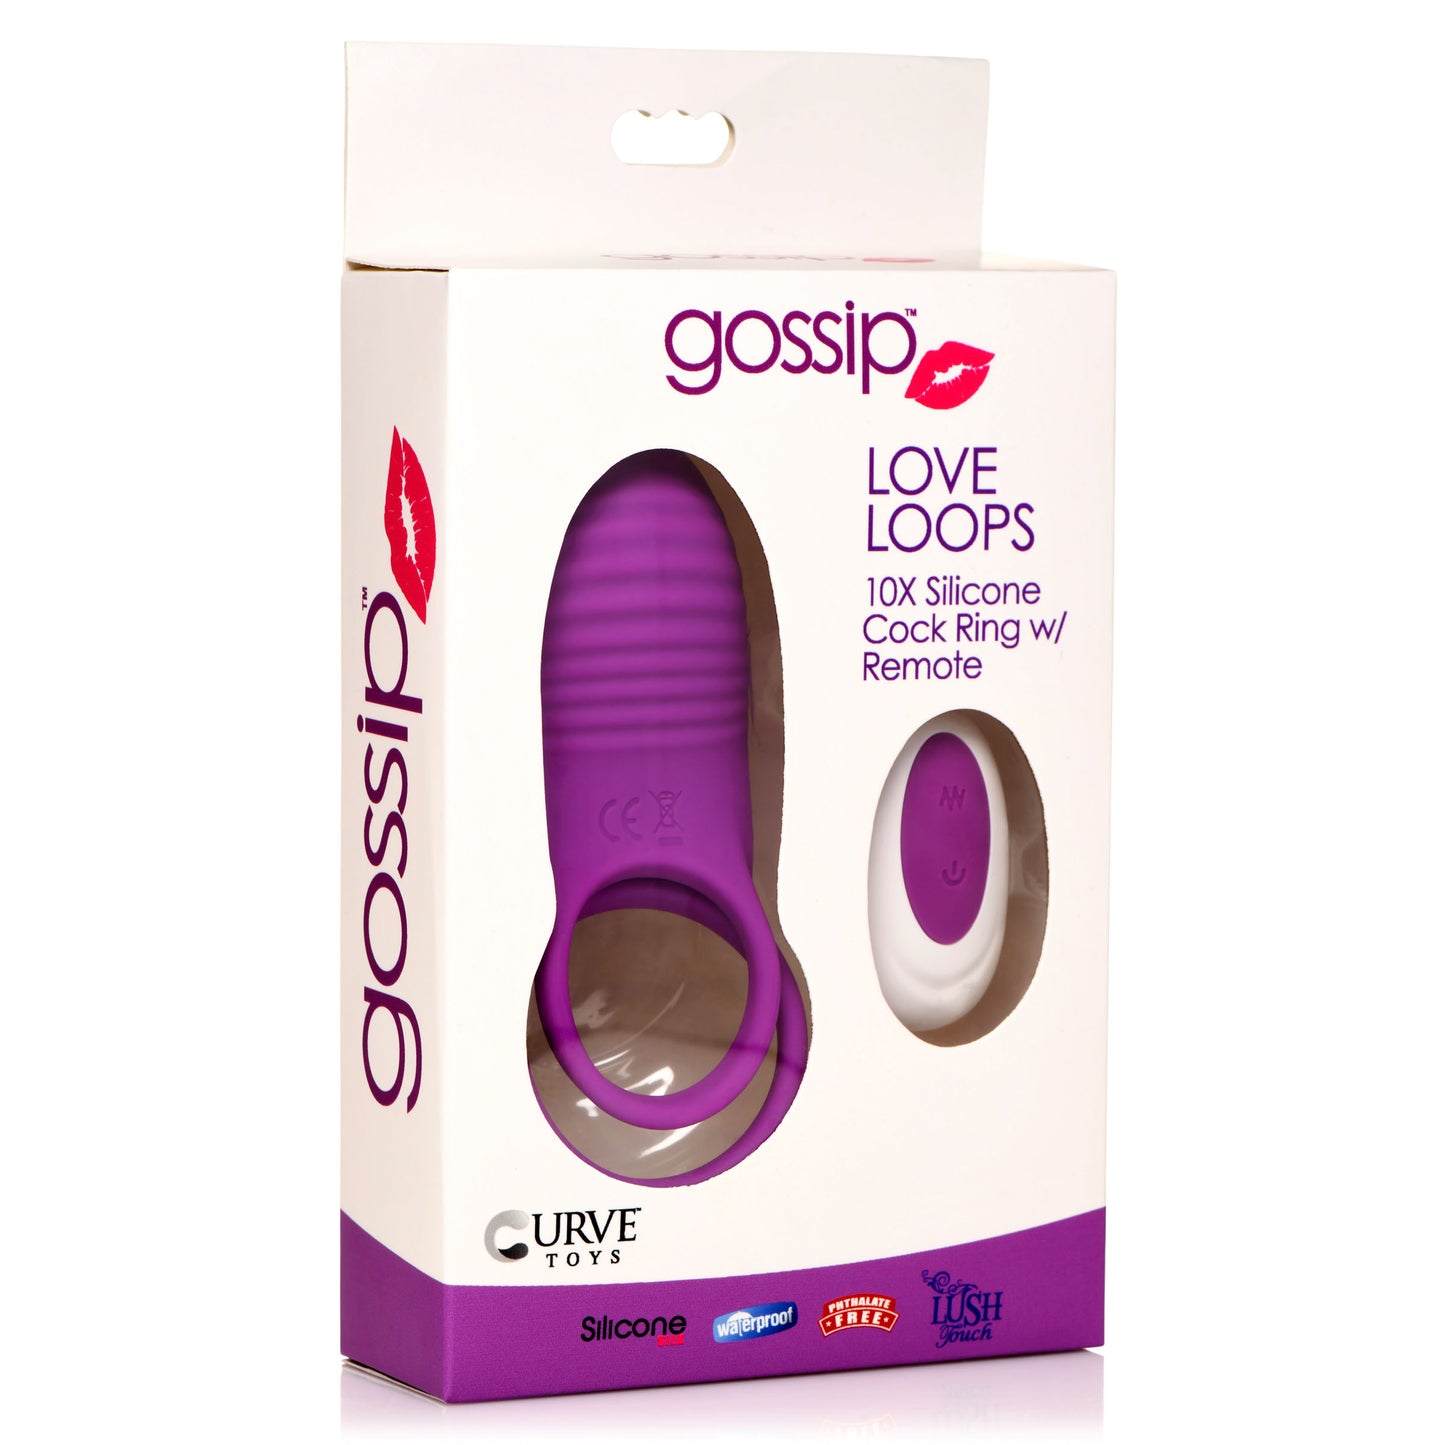 Love Loops 10x Silicone Cock Ring With Remote - Purple